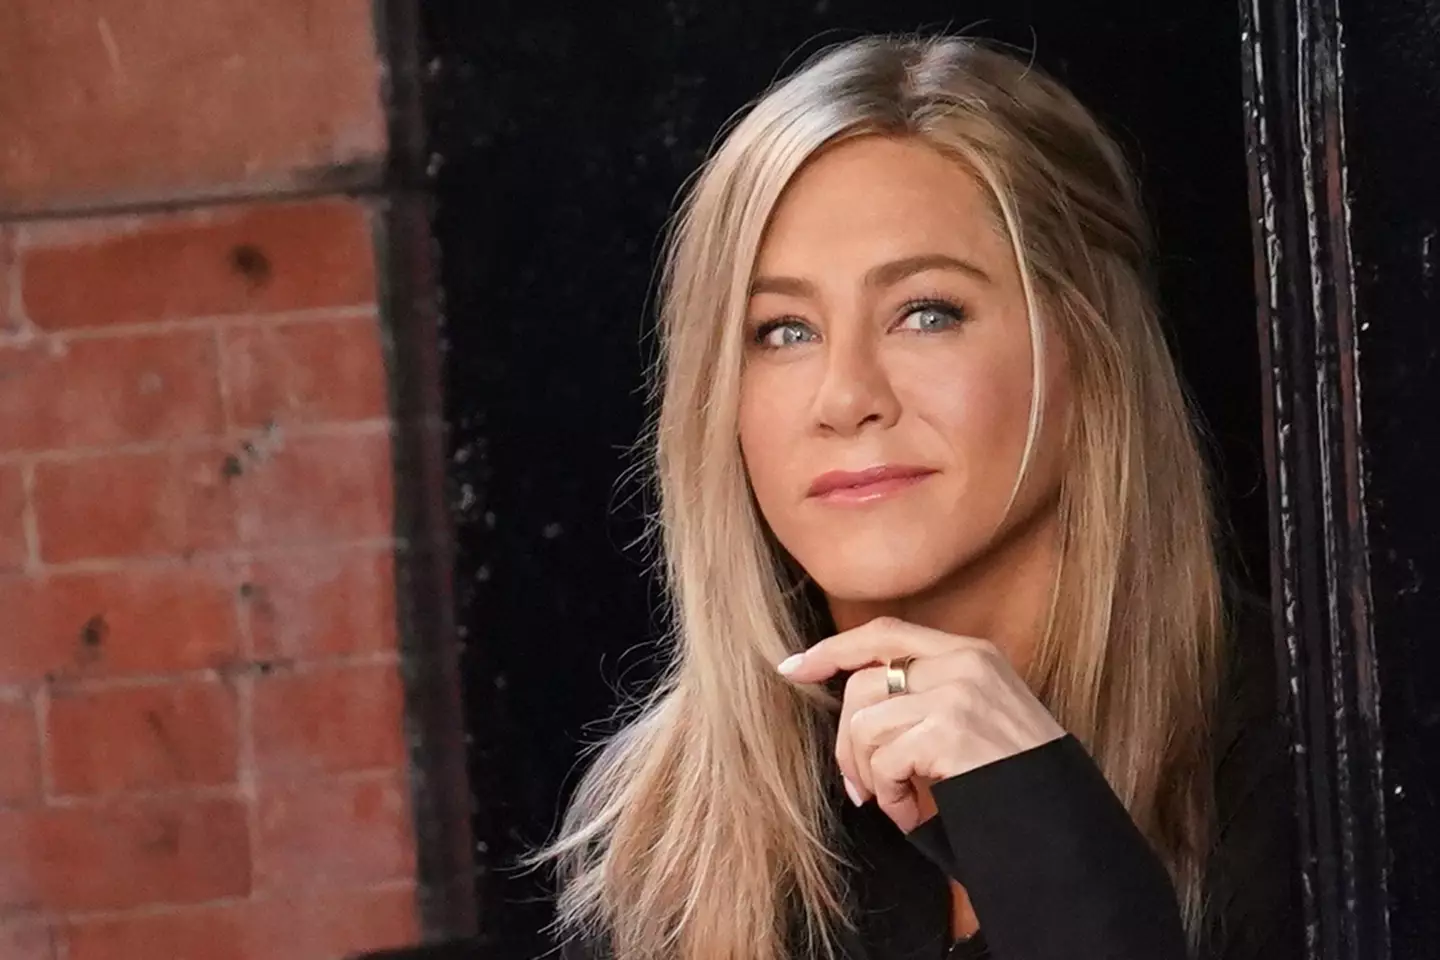 Jennifer Aniston says the hard times have made her who she is.